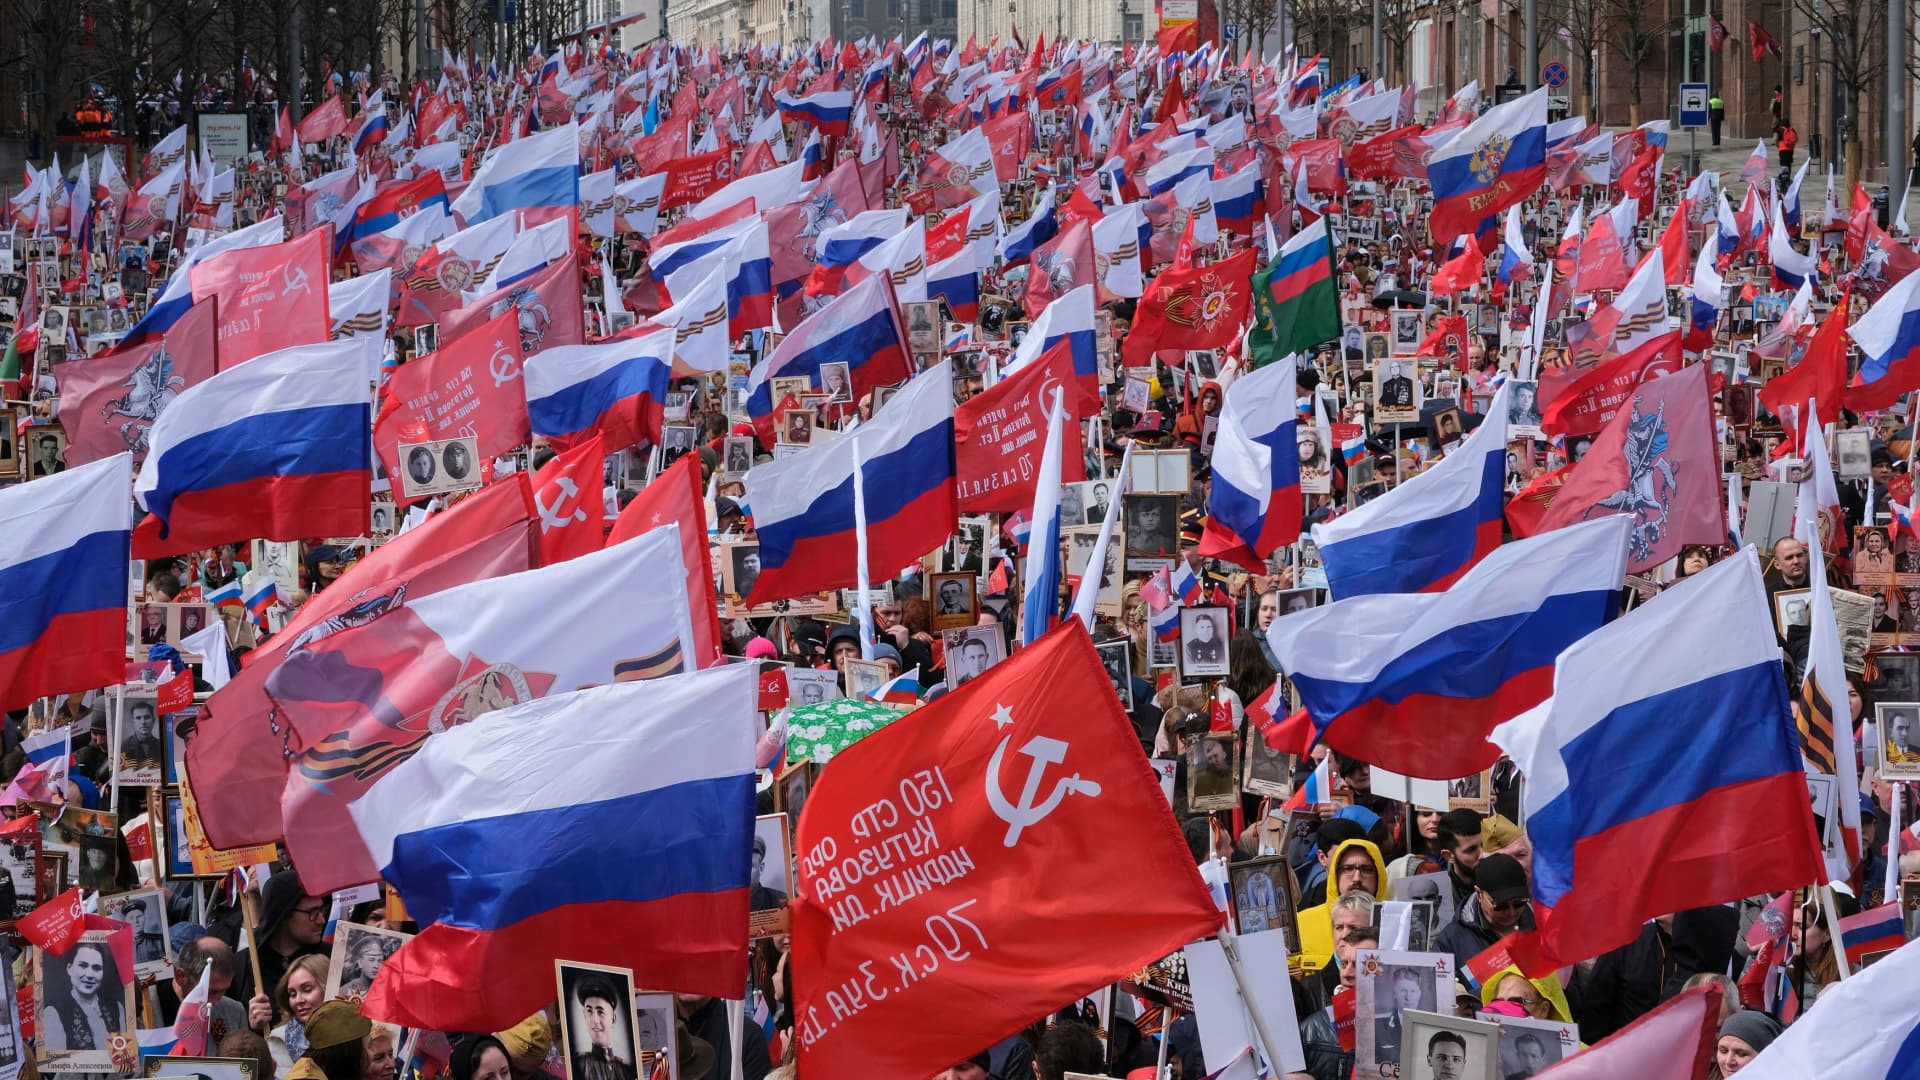 Participants carry flags and portraits of people, including Red Army soldiers, during the Immortal Regiment march on Victory Day, which marks the 77th anniversary of the victory over Nazi Germany in World War Two, in Moscow, Russia May 9, 2022. 